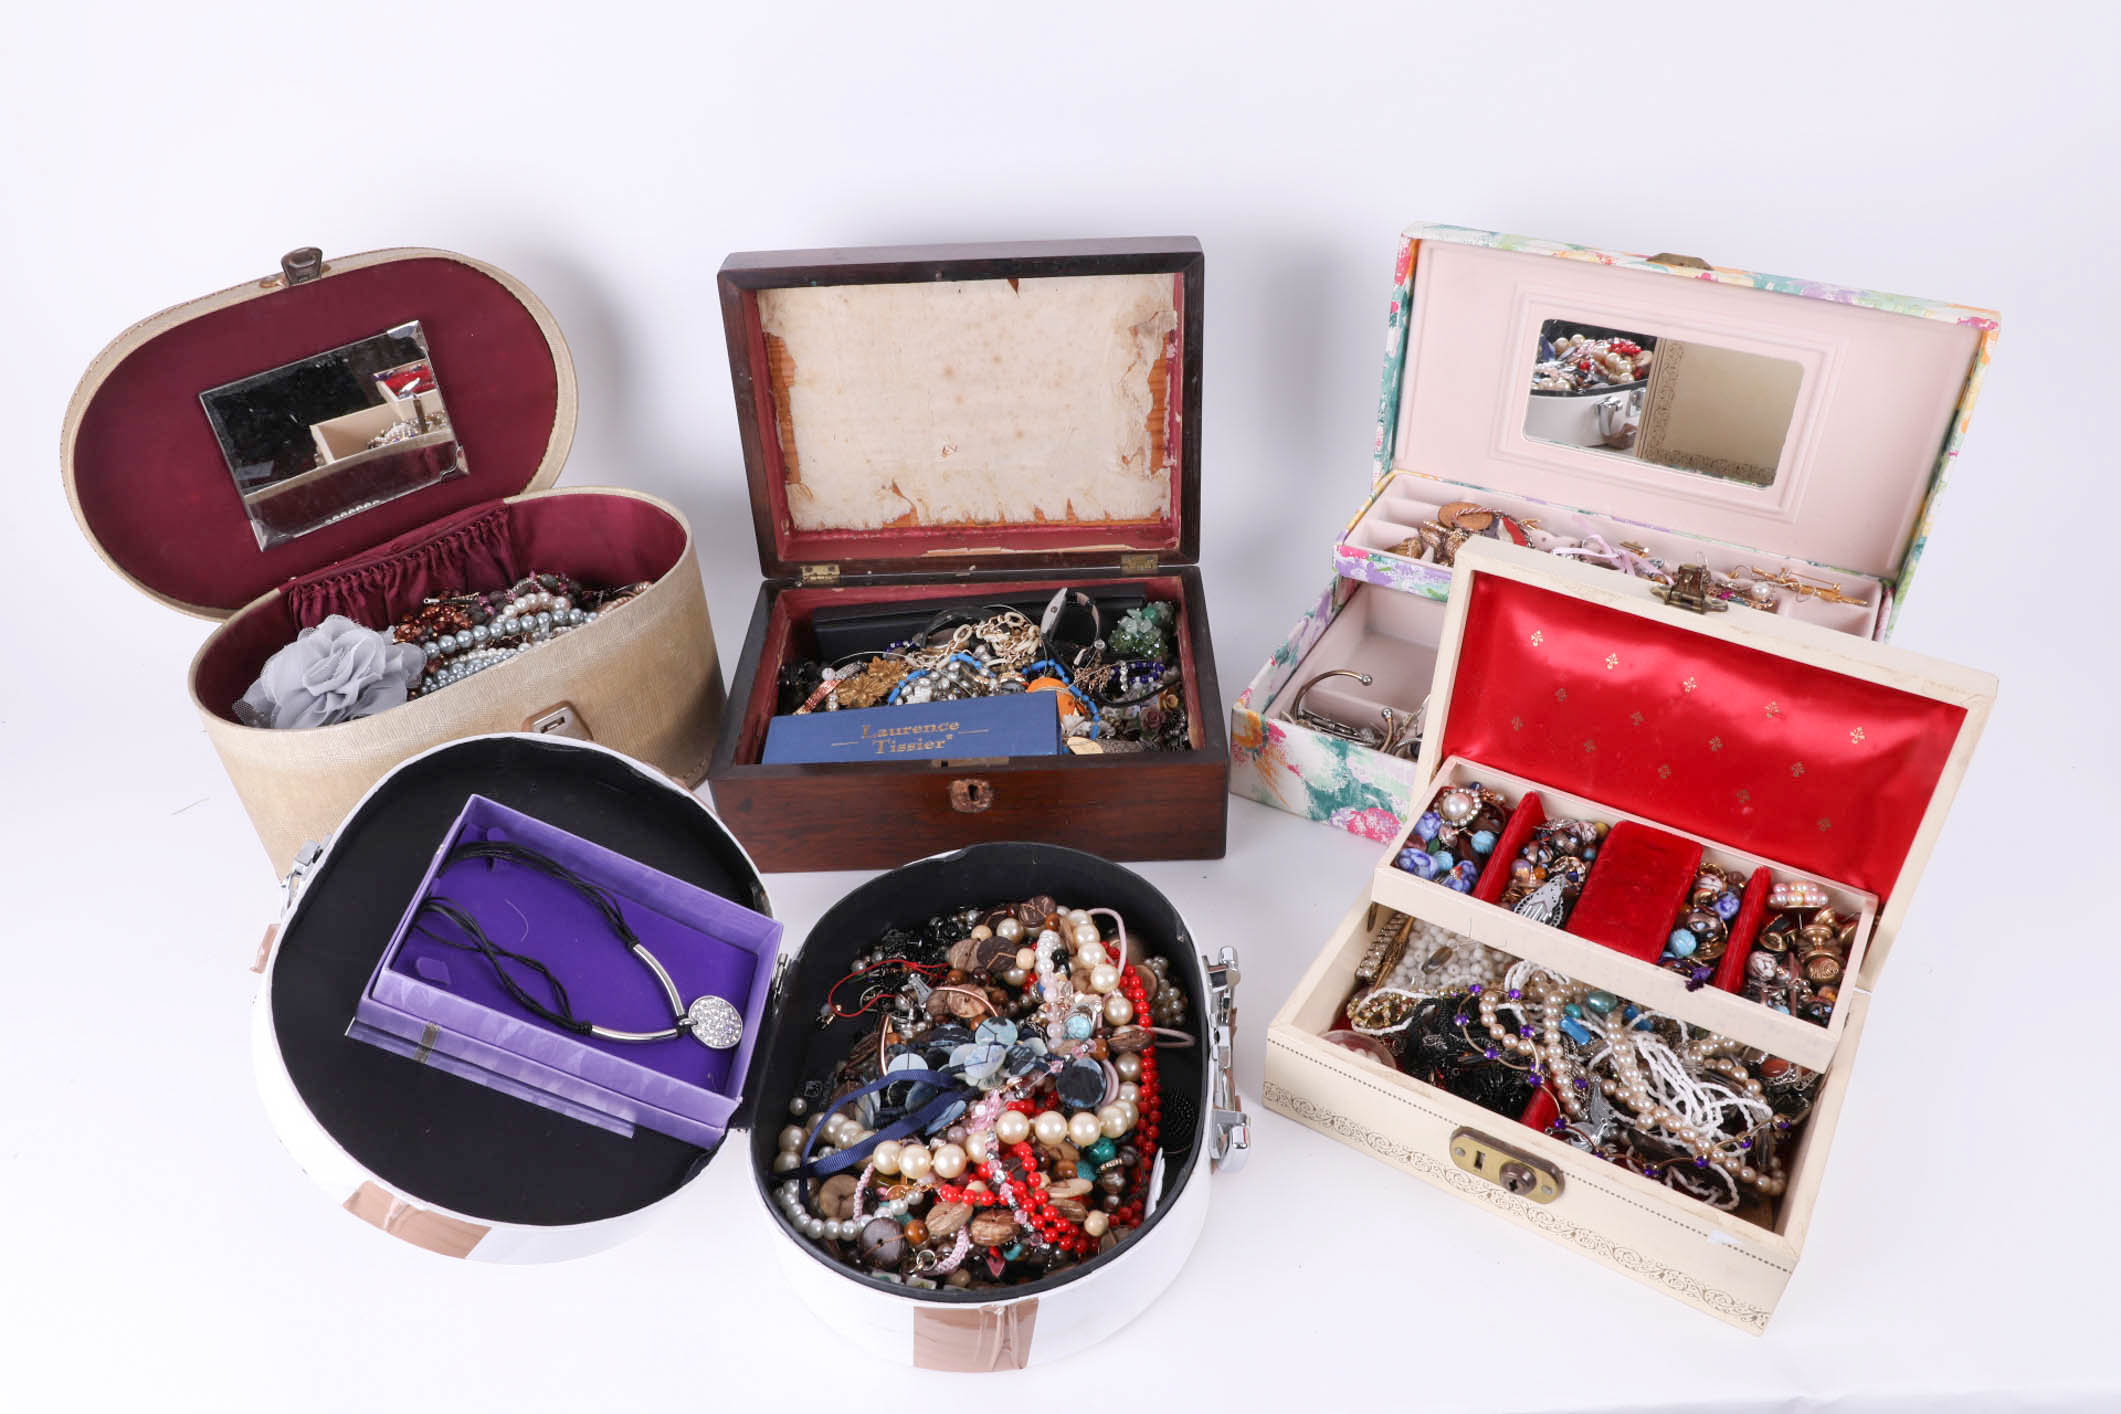 A large quantity of costume jewellery in various jewellery boxes.